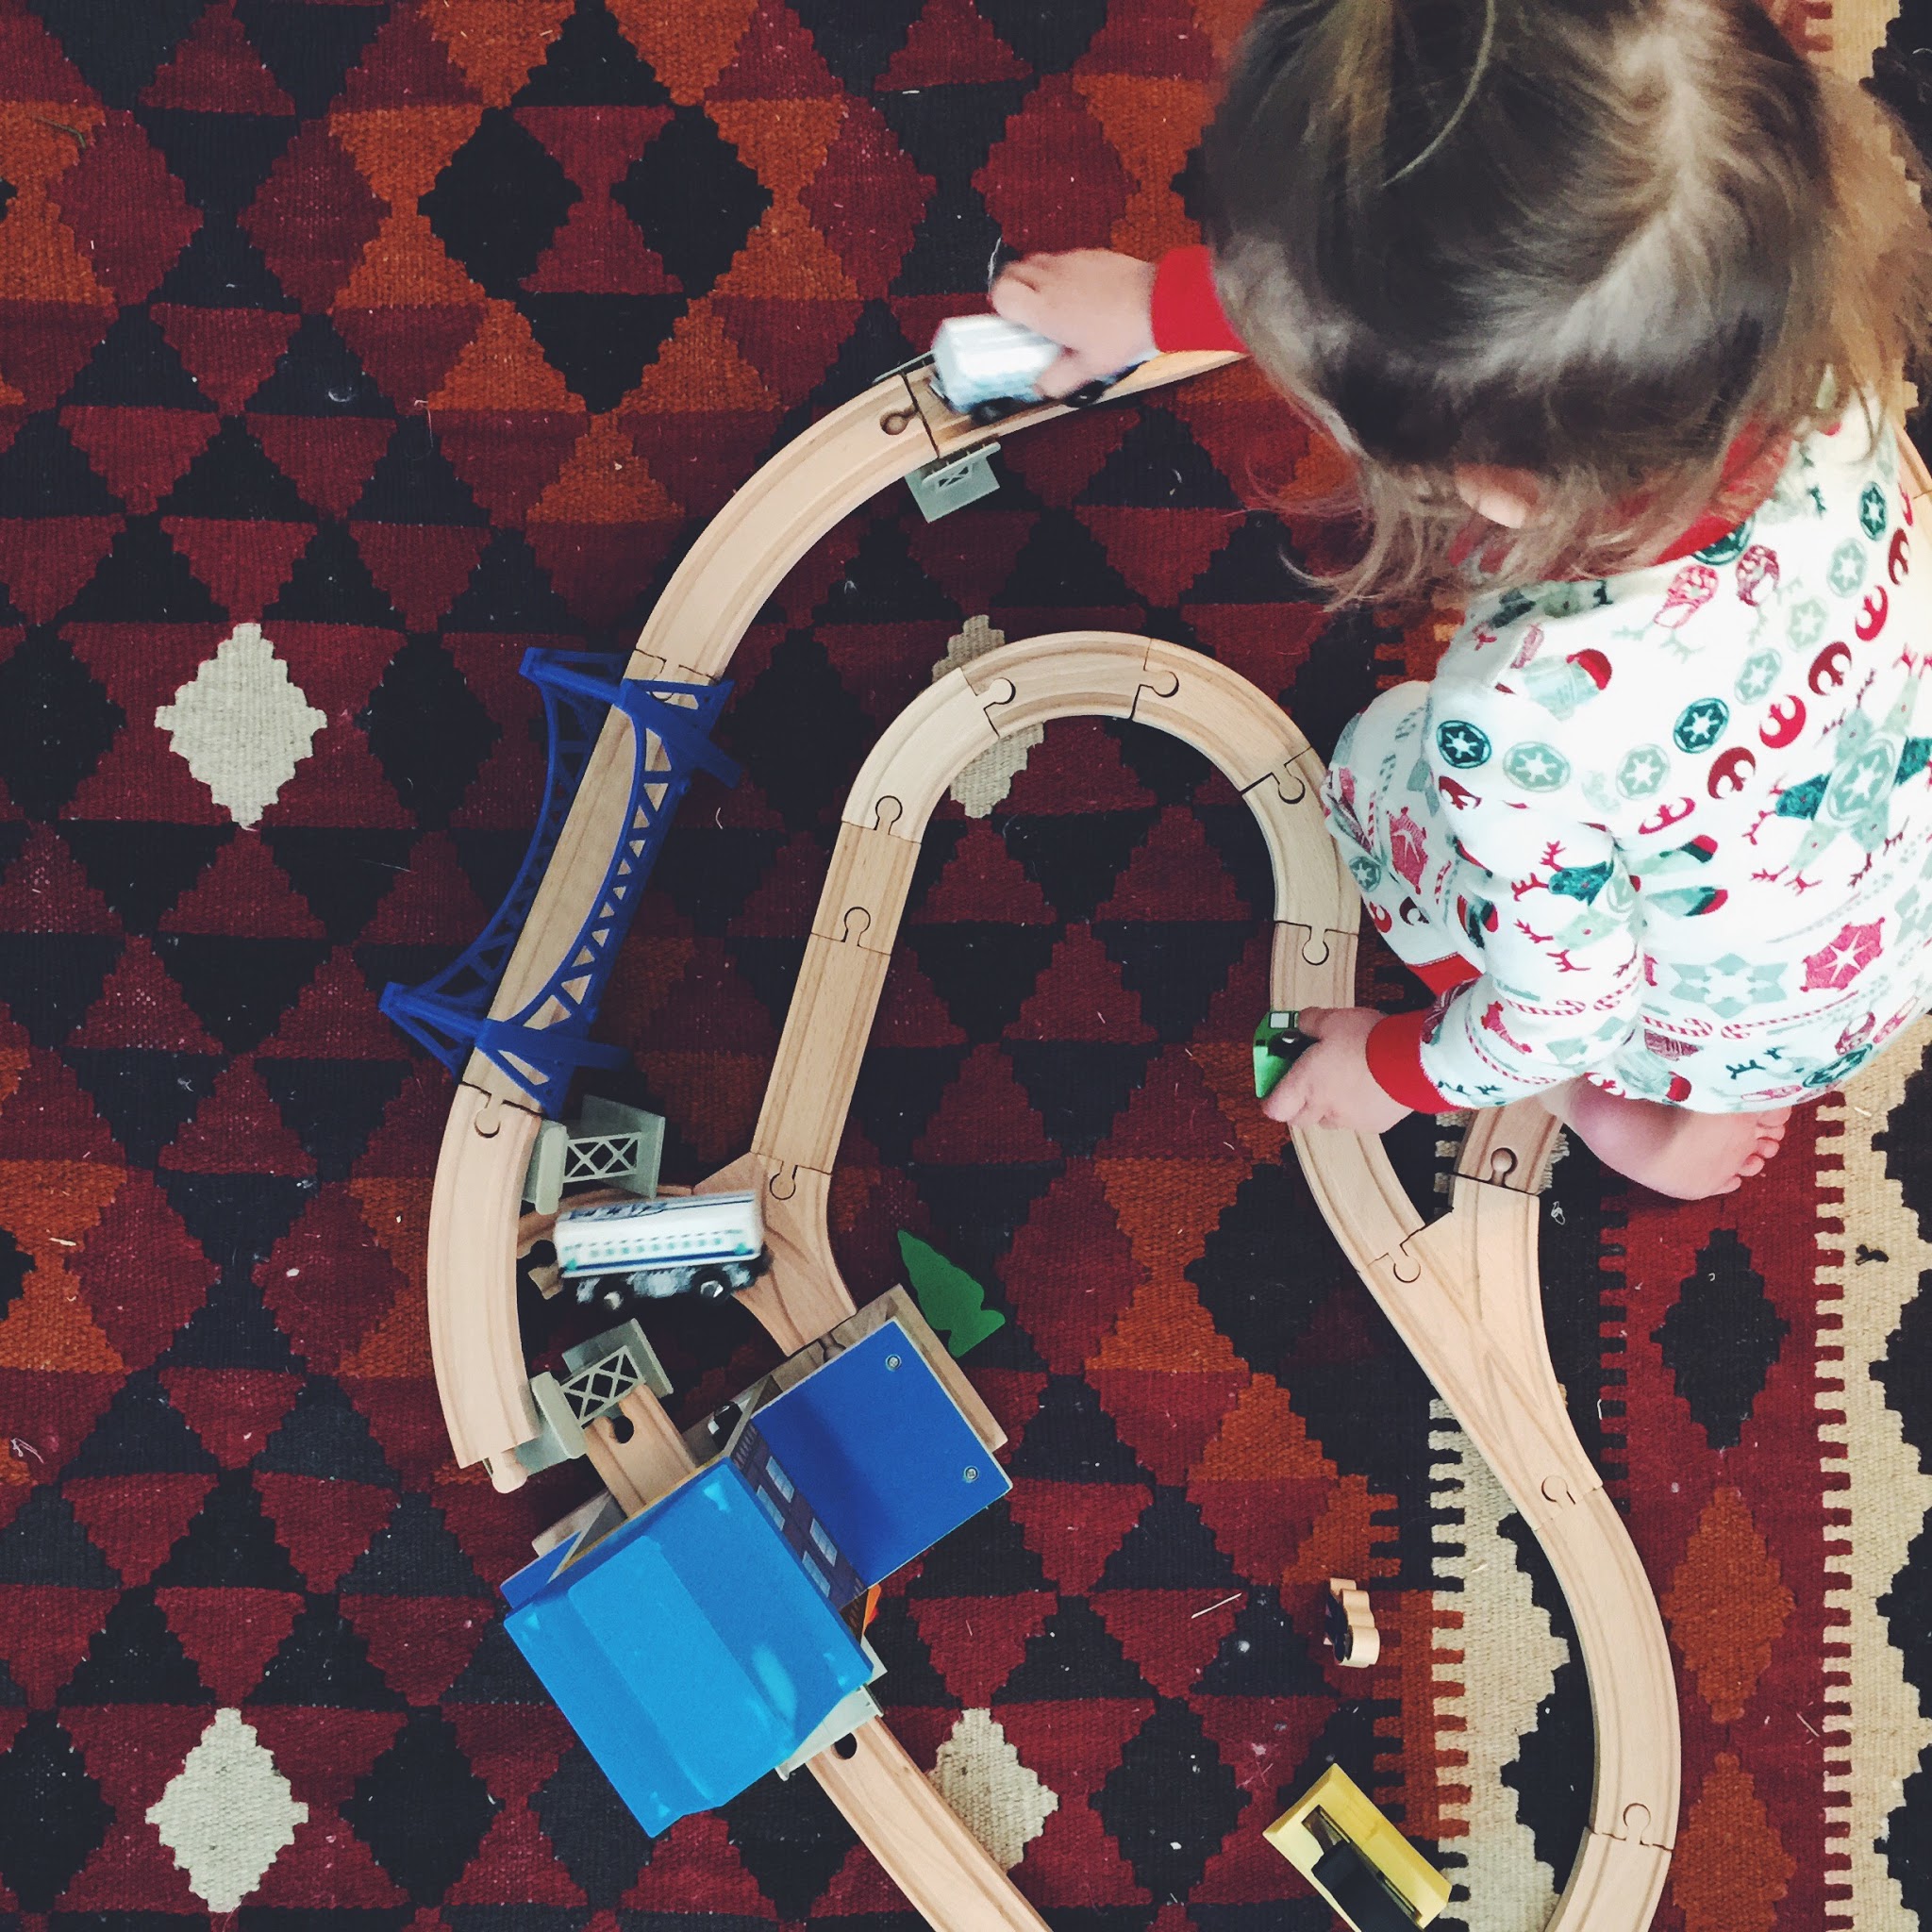 Evelyn playing with her train set